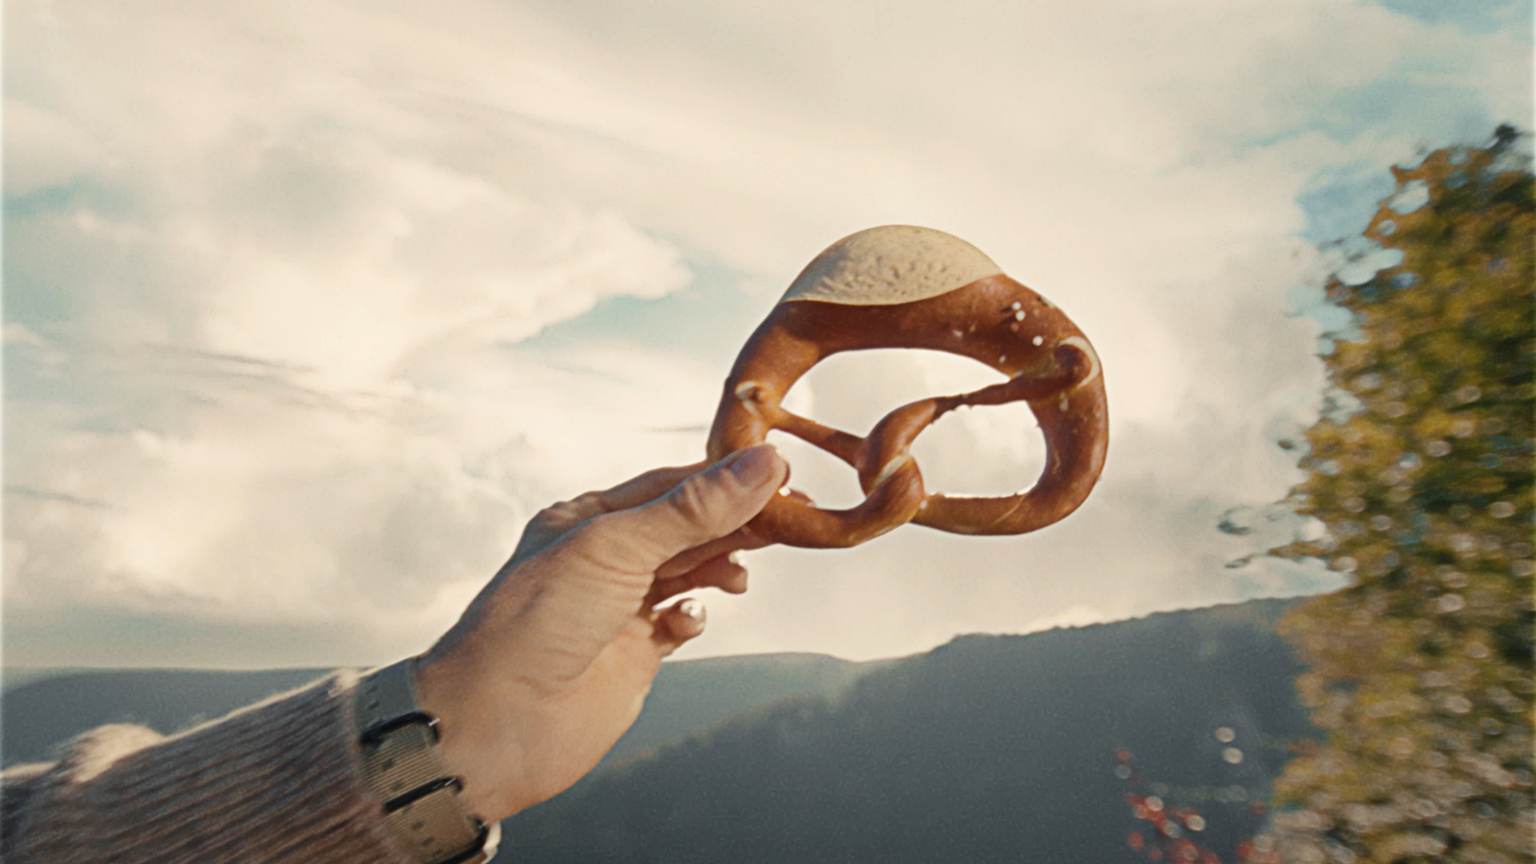 A Pretzel is being held up in front of the camera.